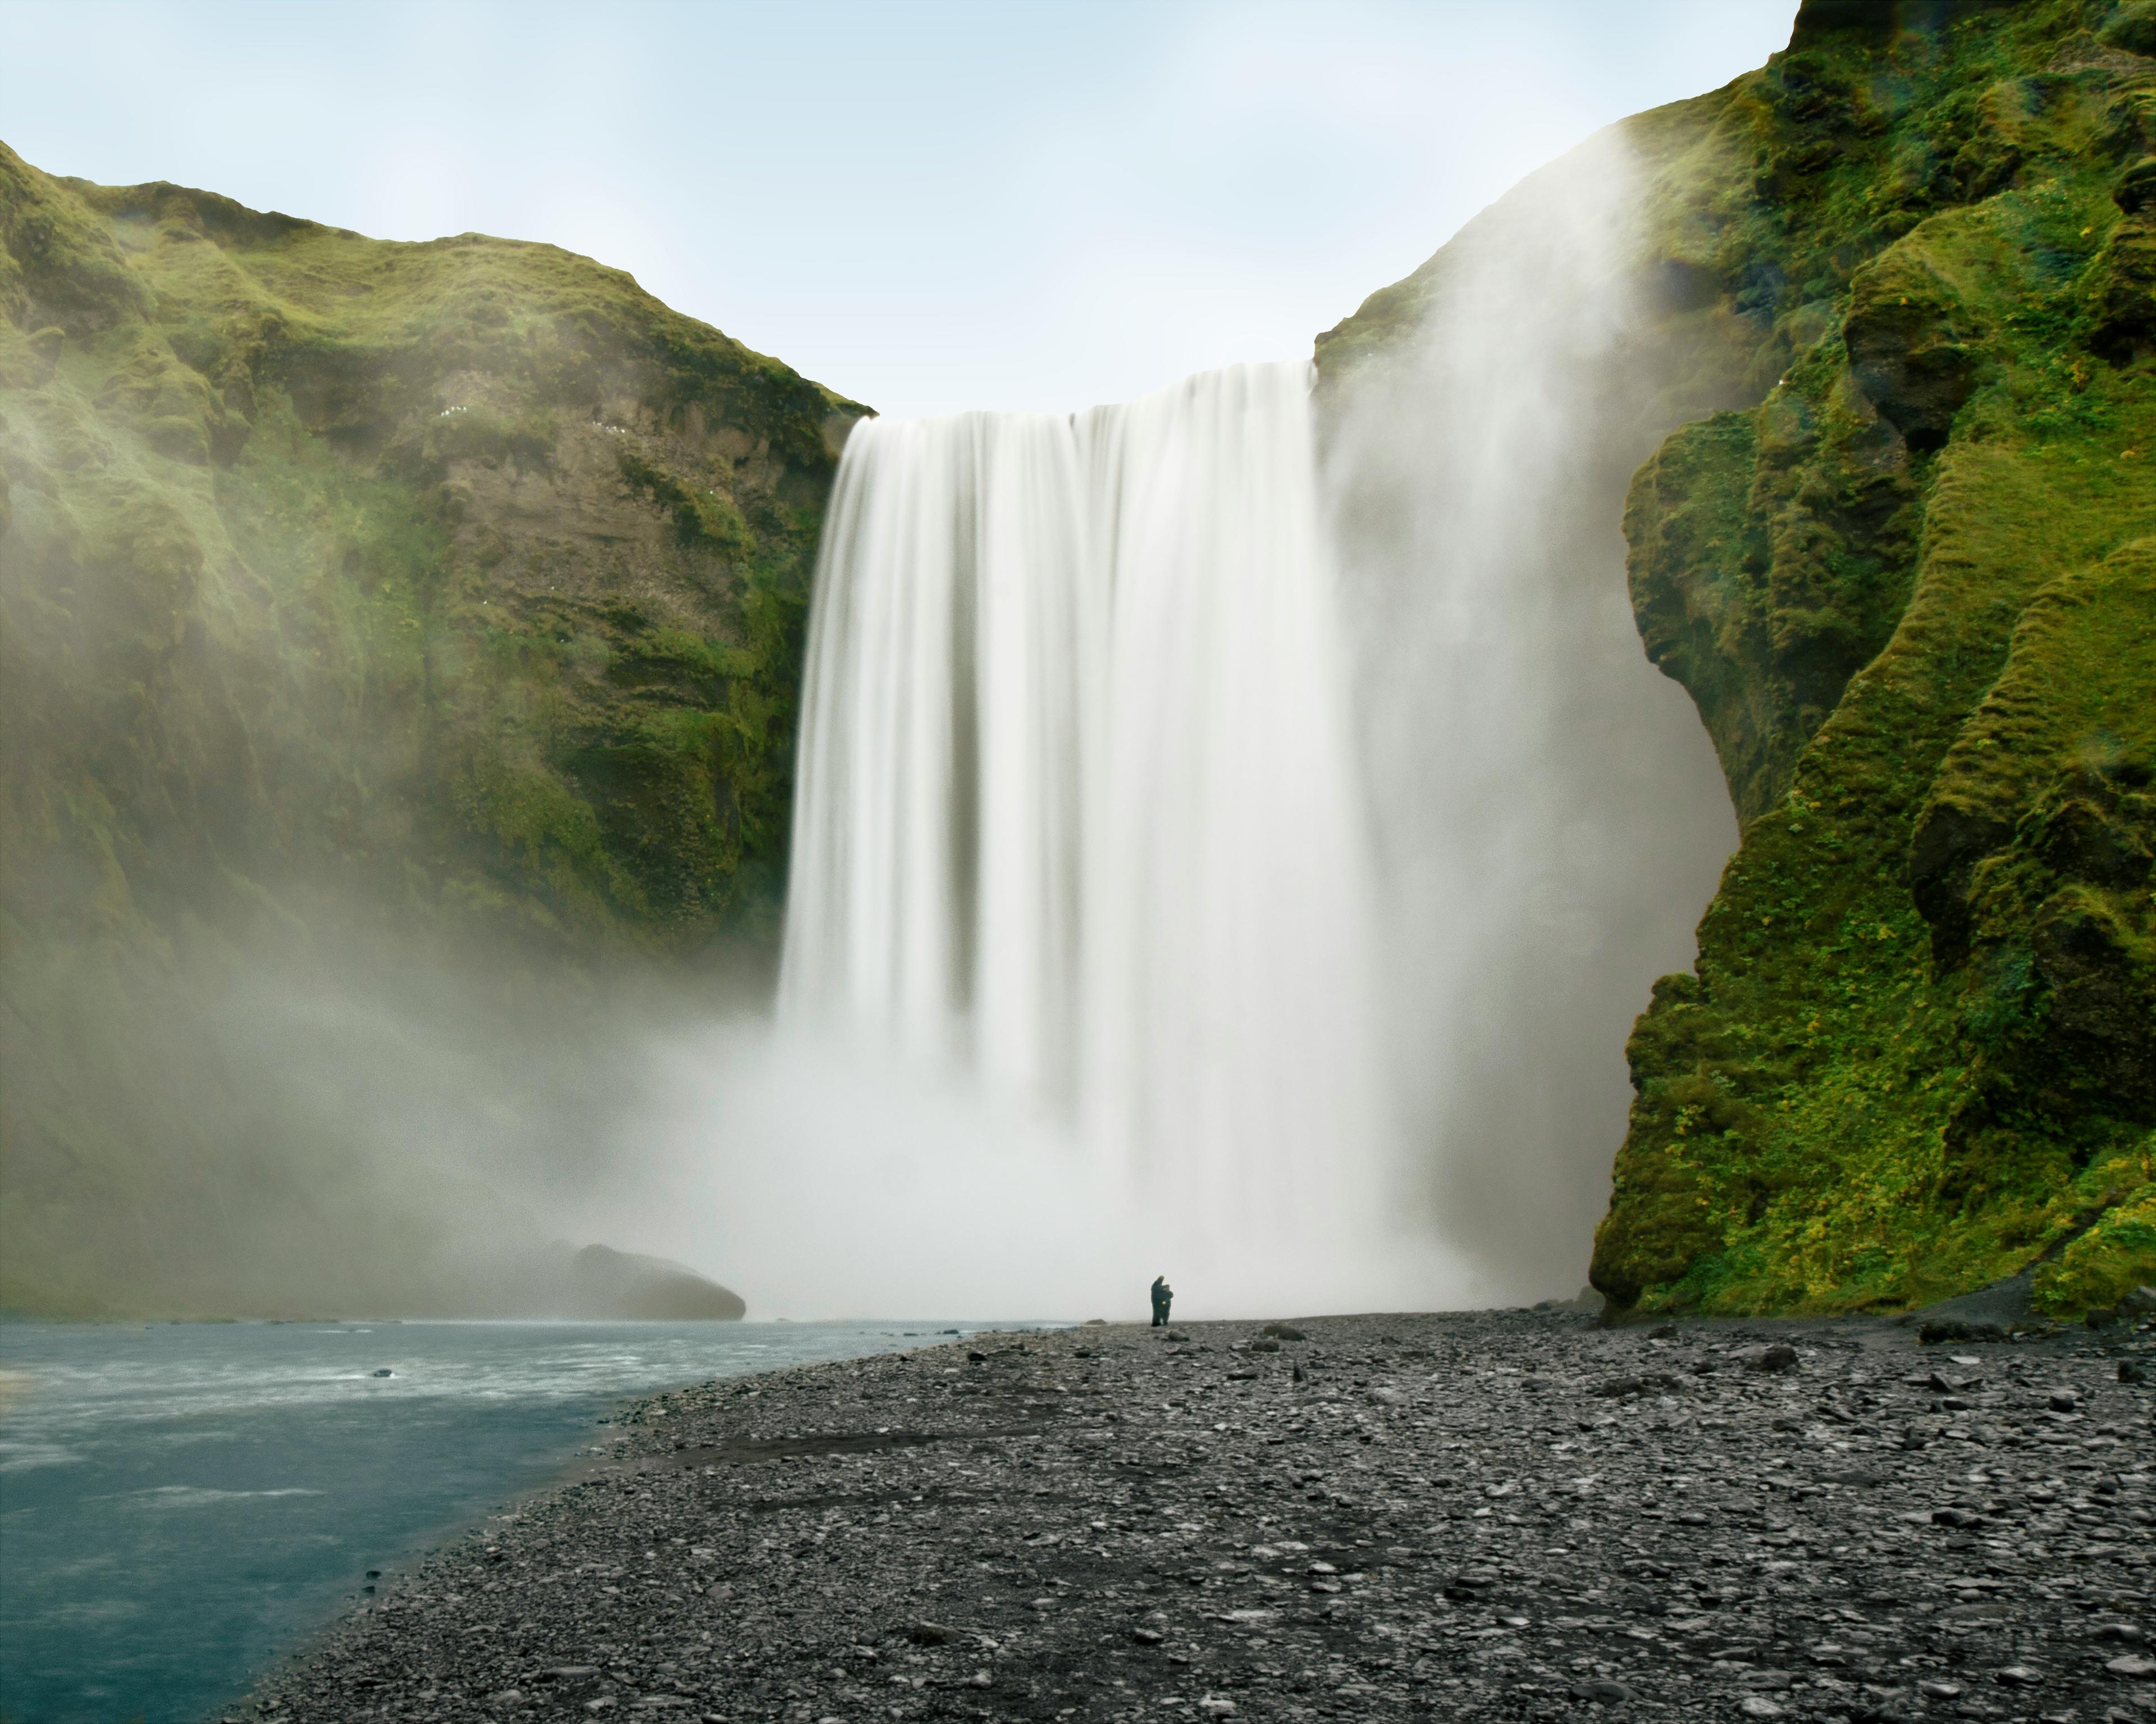 A solitary figure stands at a distance, dwarfed by the immense scale of a powerful waterfall plunging into a misty pool, surrounded by lush green cliffs.